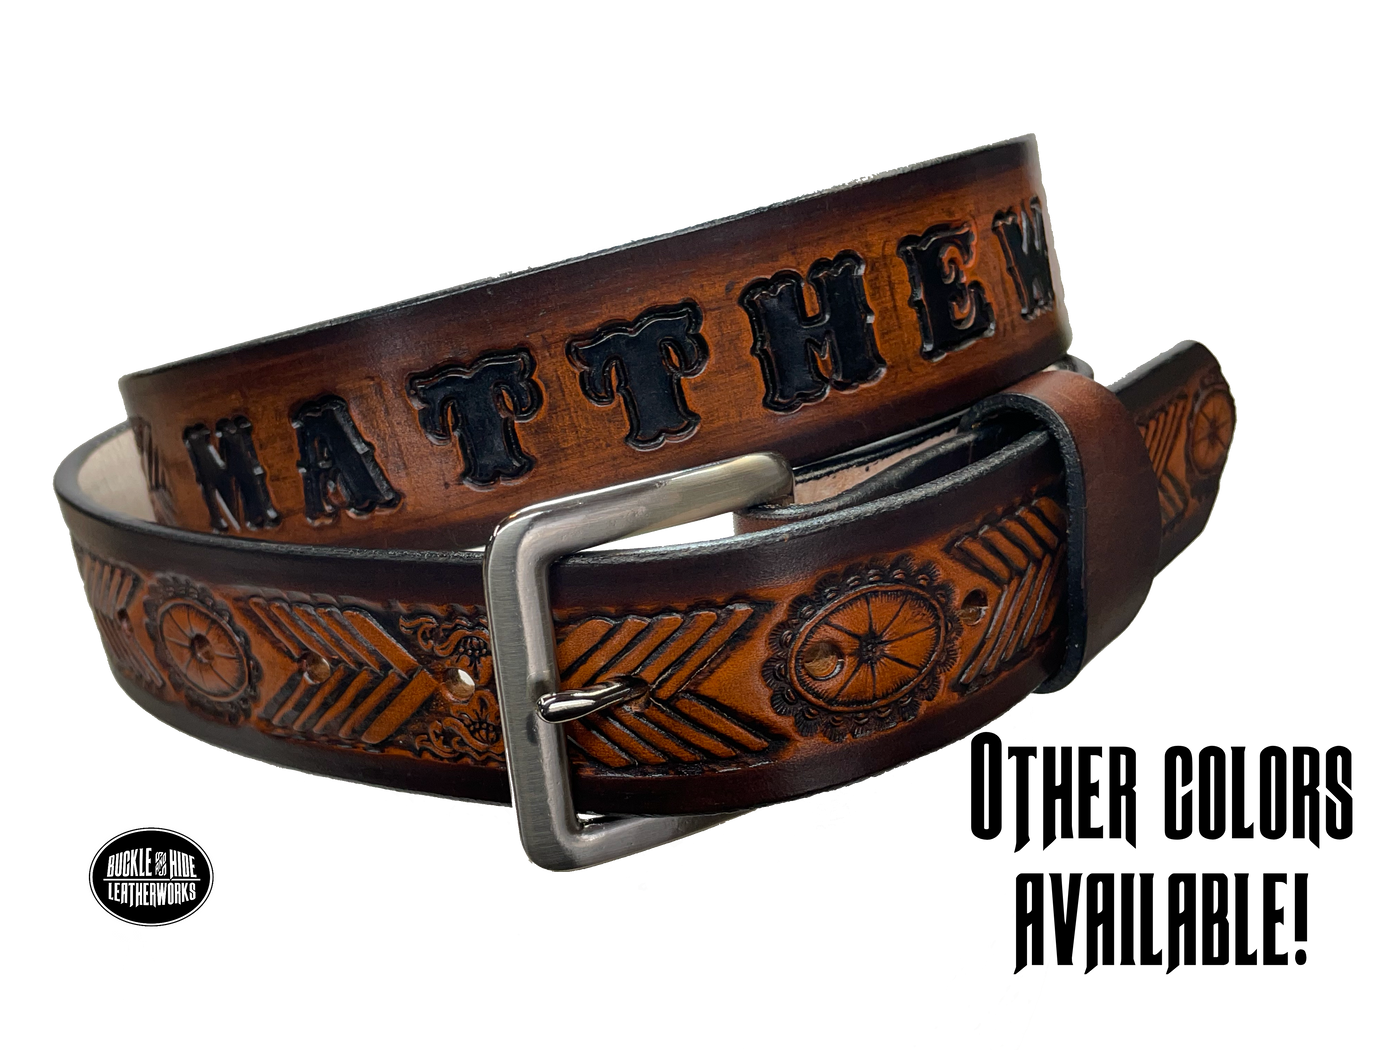 This unique belt features a chevron shape that replicates a hand-laced look, plus an oval concho. Snap-on buckle made from veg tan cowhide in your choice of finish or with a name. Crafted with care in Tennessee, just a hop, skip, and a jump away from Nashville.